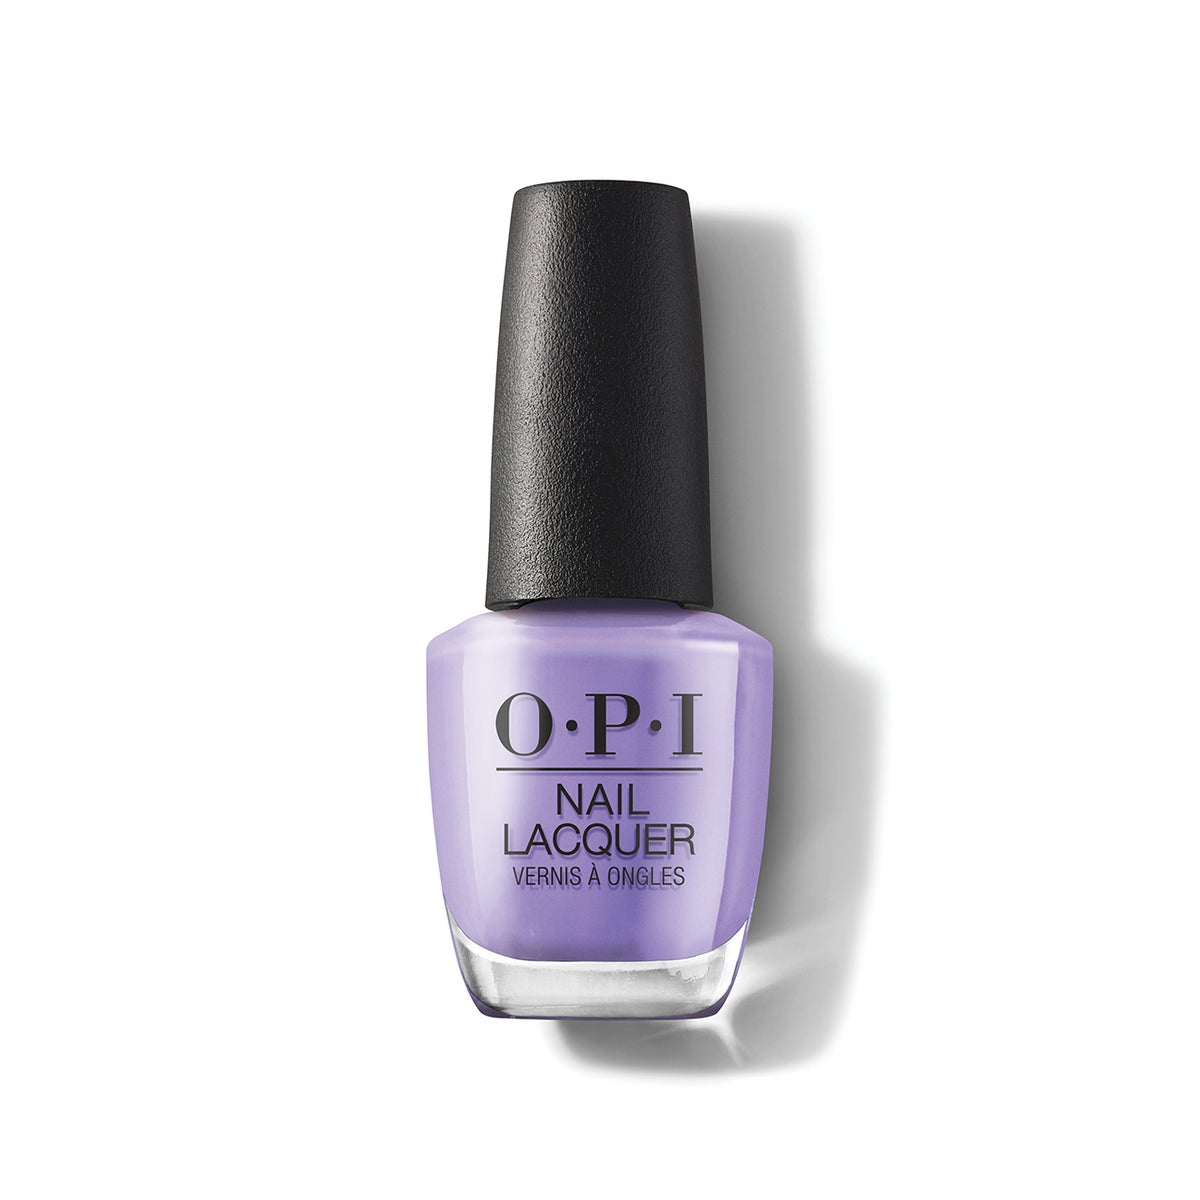 Skate To The Party - OPI Nail Lacquer